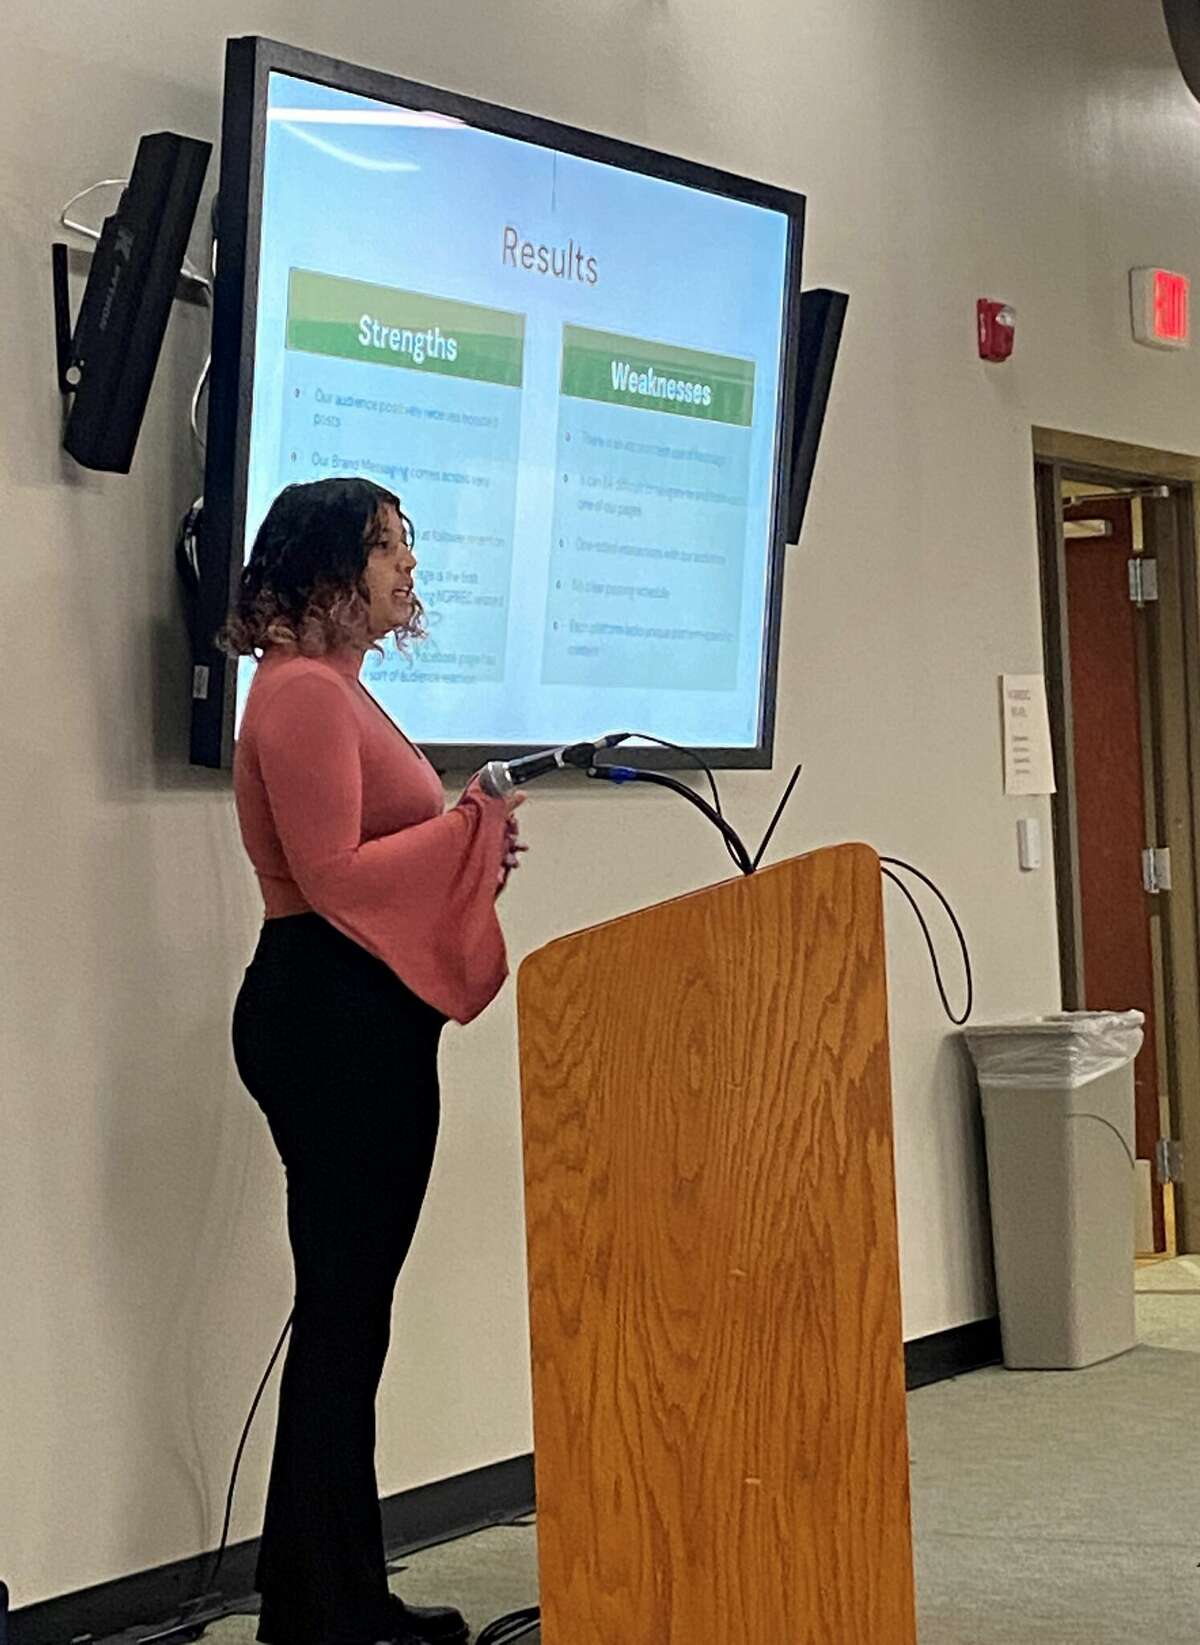 CODES student and NGRREC intern Kaz Isibue is shown speaking at the NGRREC November Neighbor Nights. NGRREC is partnering with Southern Illinois University Edwardsville’s Community Oriented Digital Engagement Scholars to address key issues in the region.